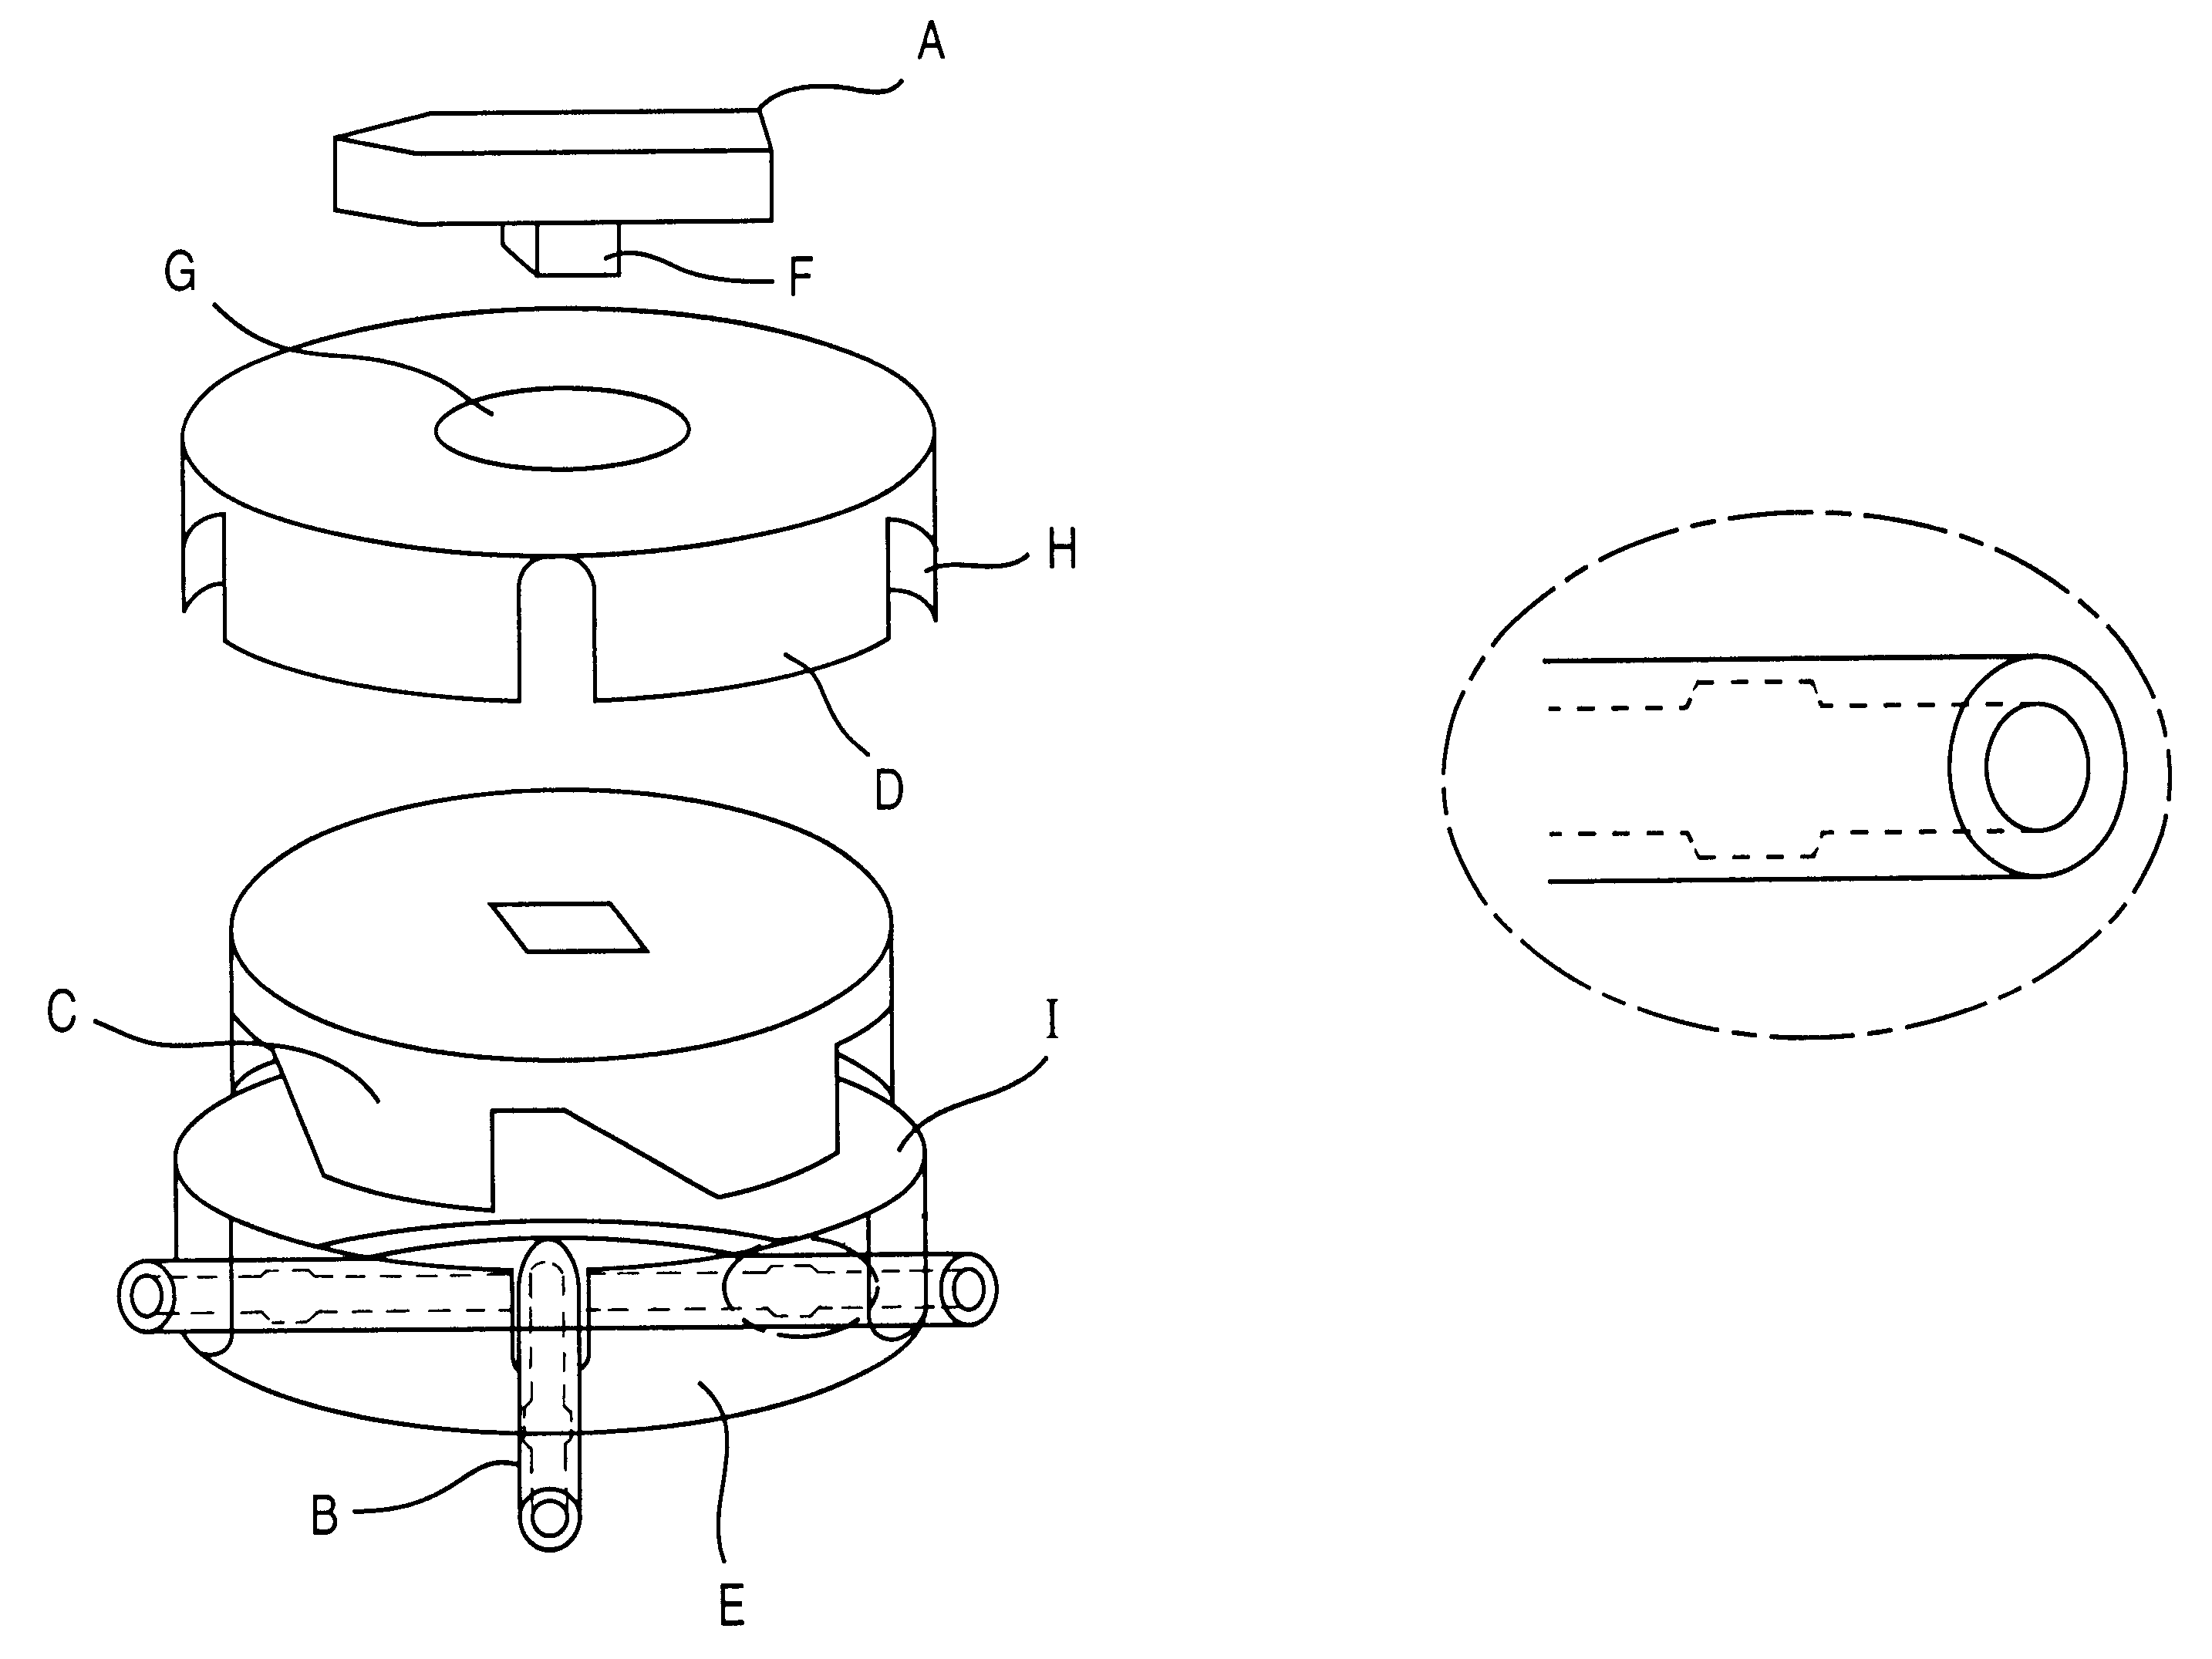 Fluid passage change-over apparatus for medical treatment